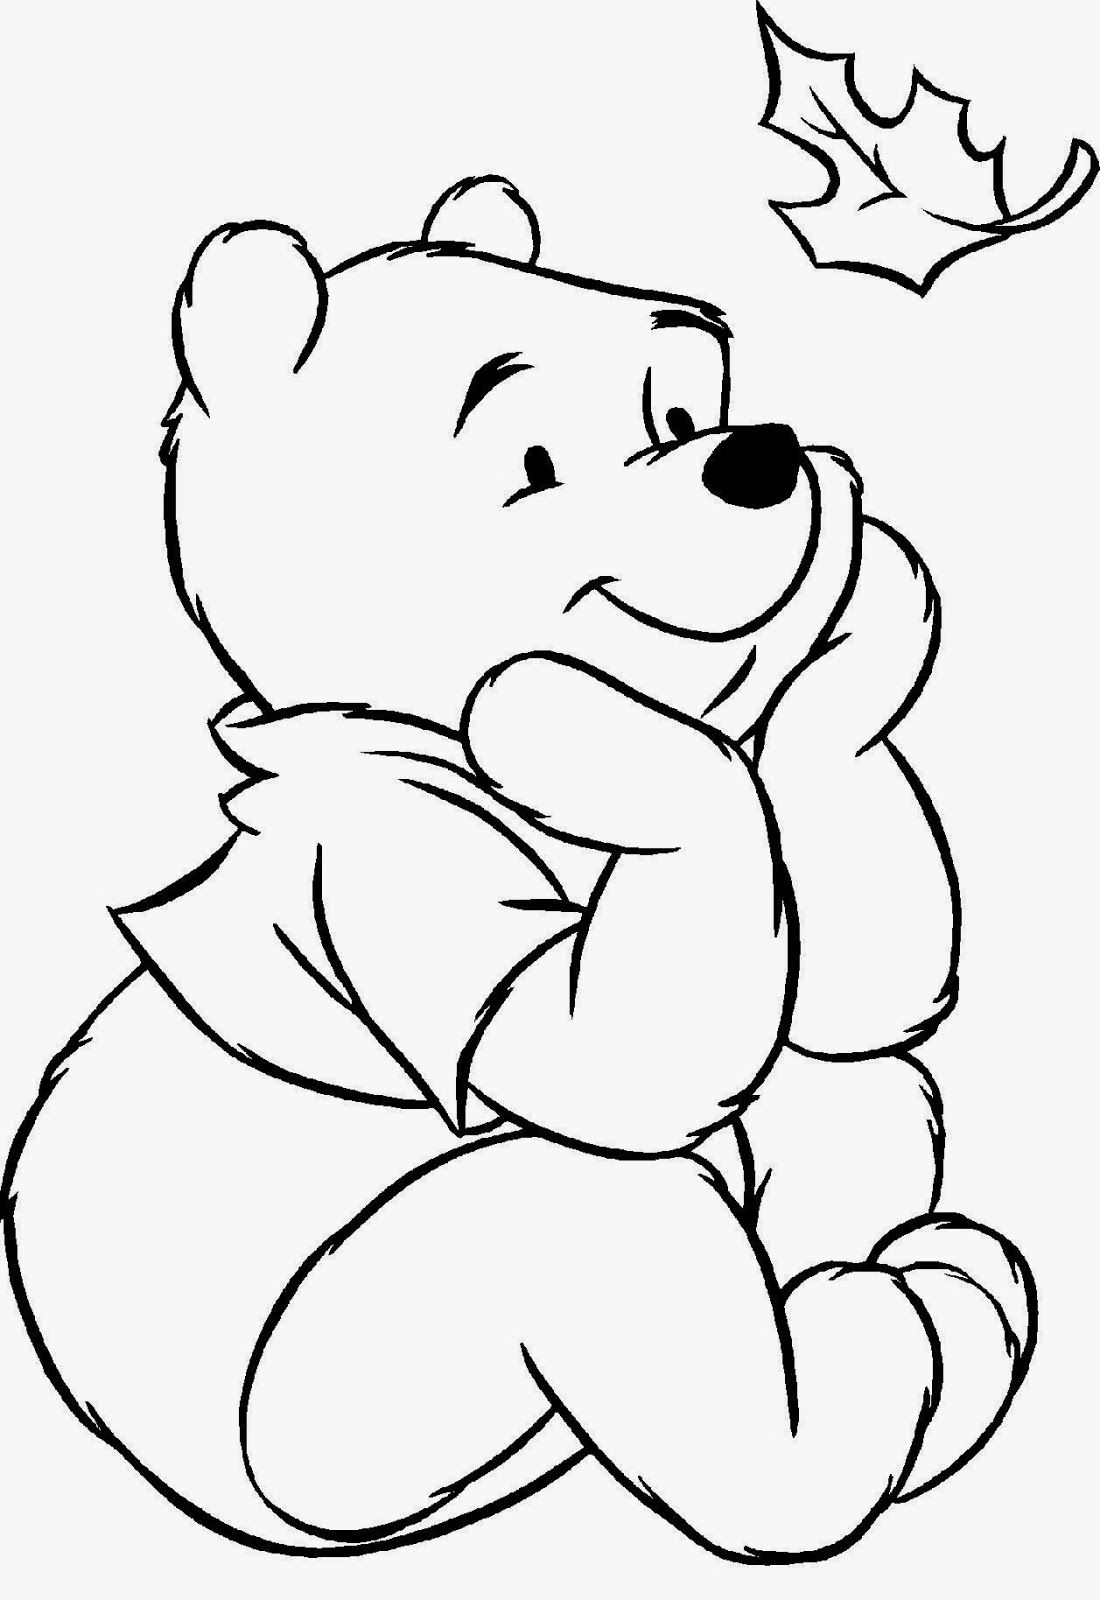 Pooh Bear Coloring Pages | Free Coloring Pages